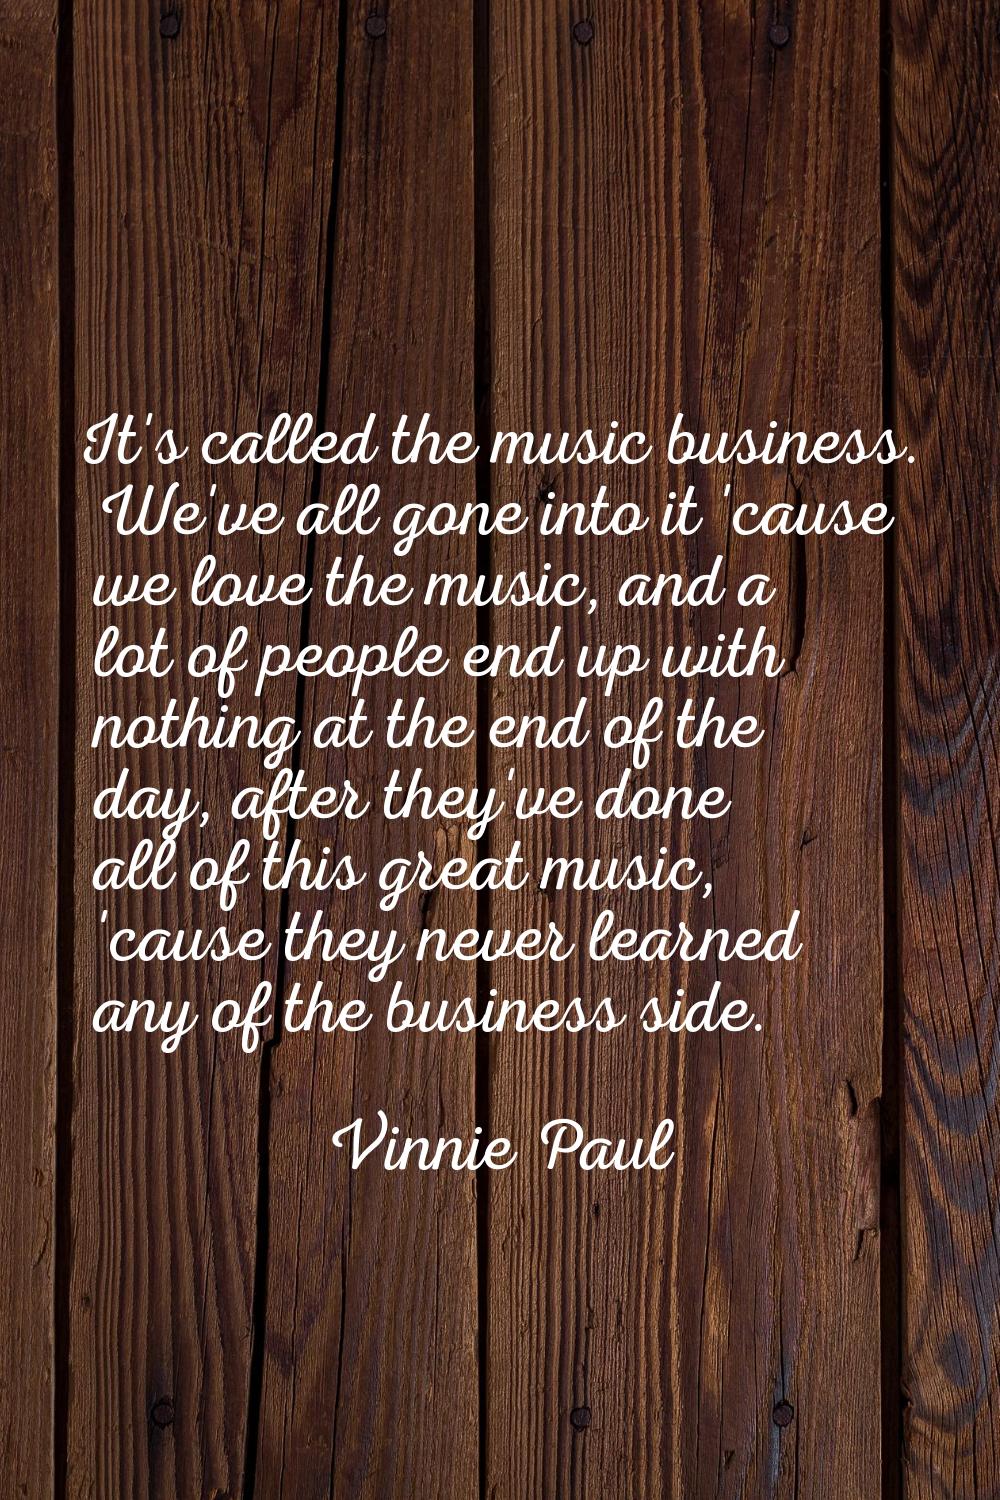 It's called the music business. We've all gone into it 'cause we love the music, and a lot of peopl